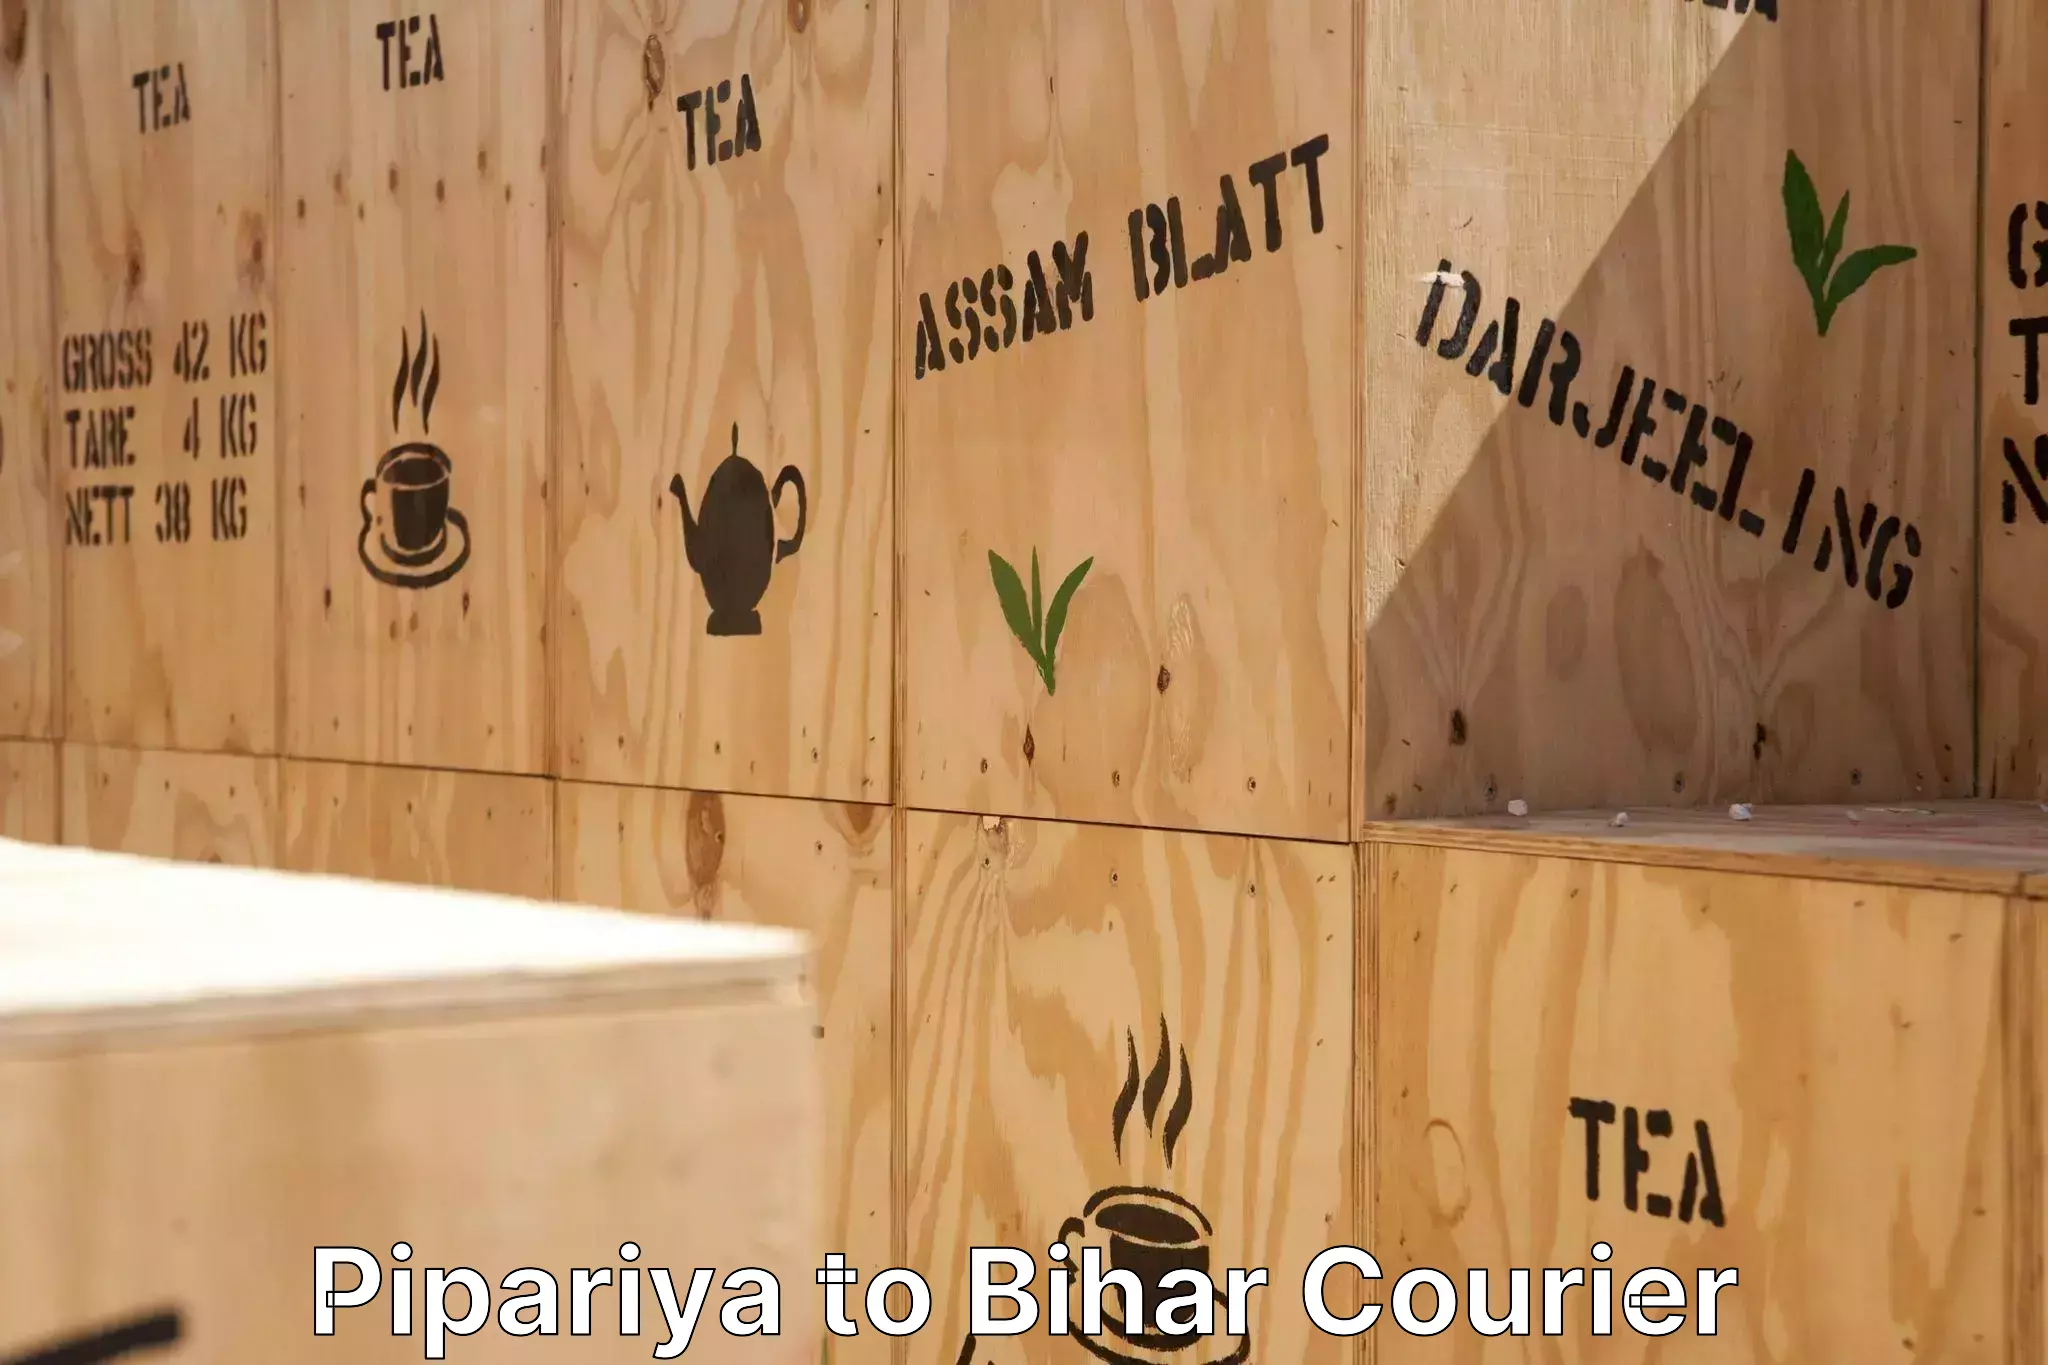 Furniture transport specialists Pipariya to Sheohar